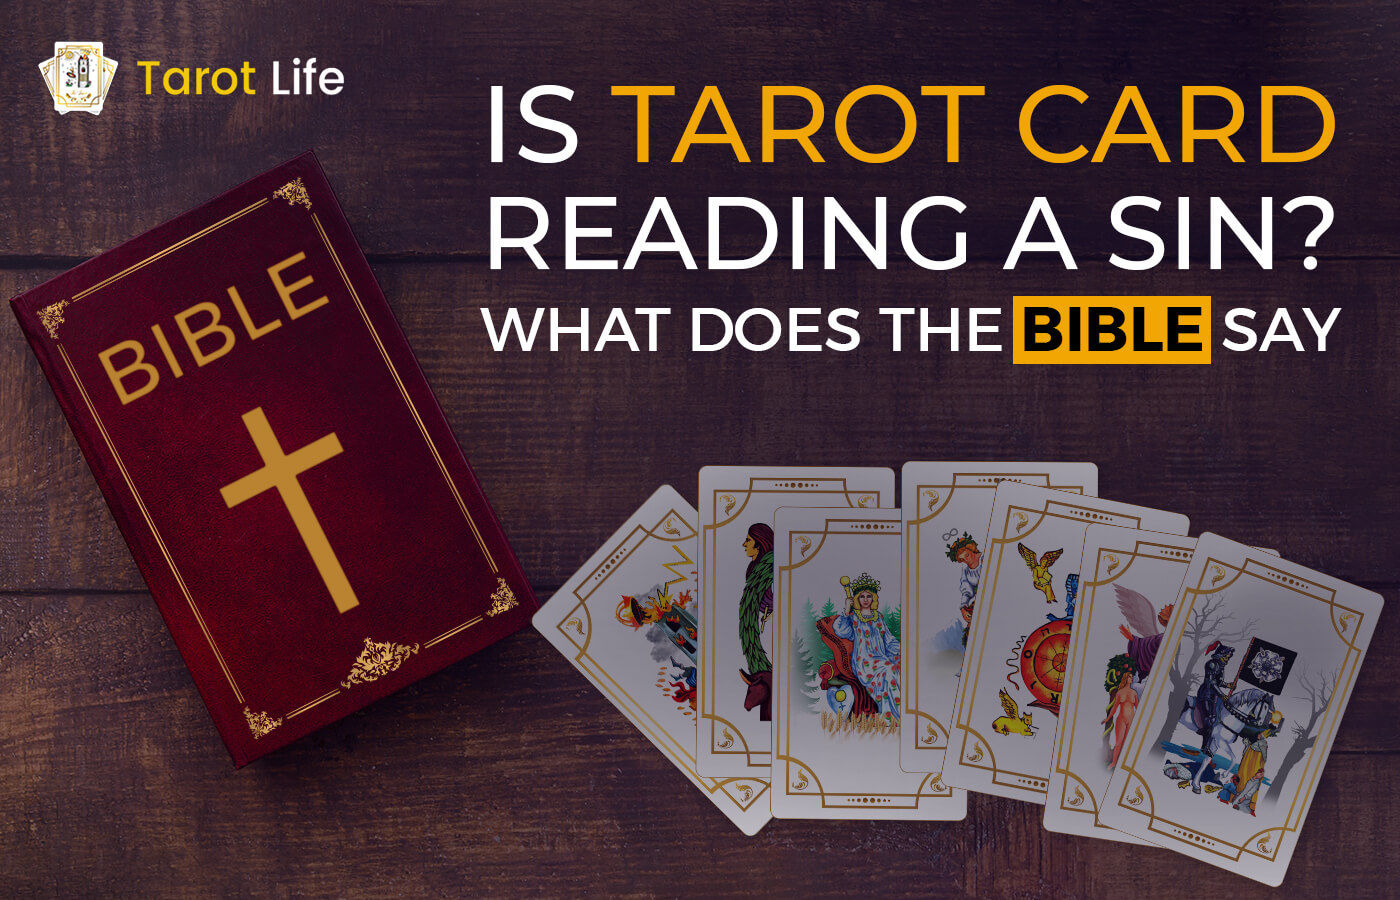  Is Tarot Card Reading A Sin? What does the Bible say